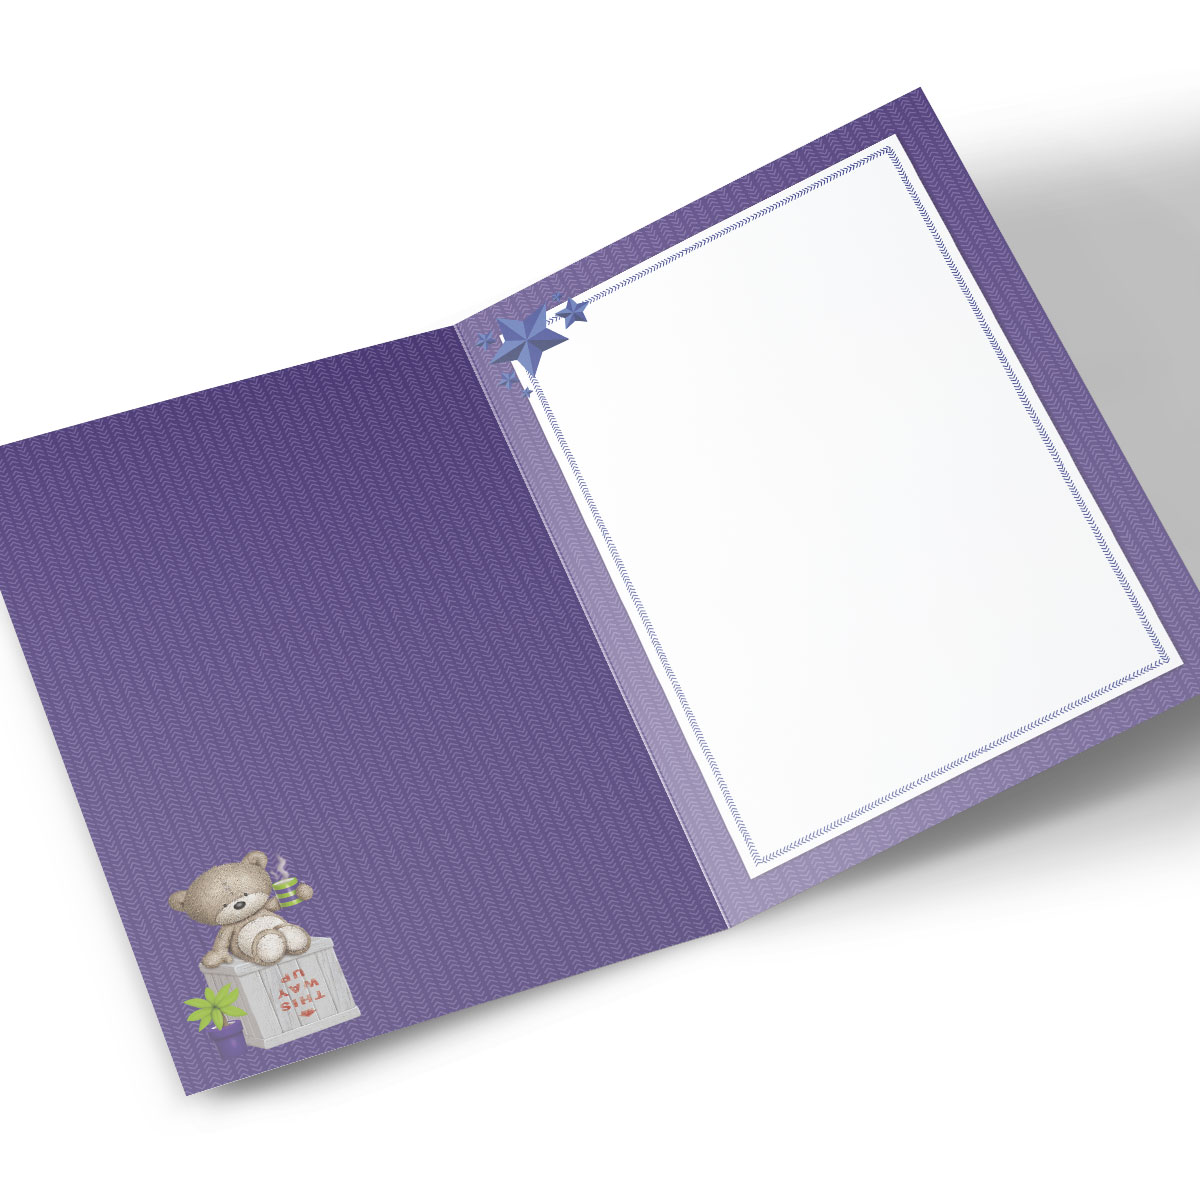 Personalised New Home Card - Hugs Bear With Box